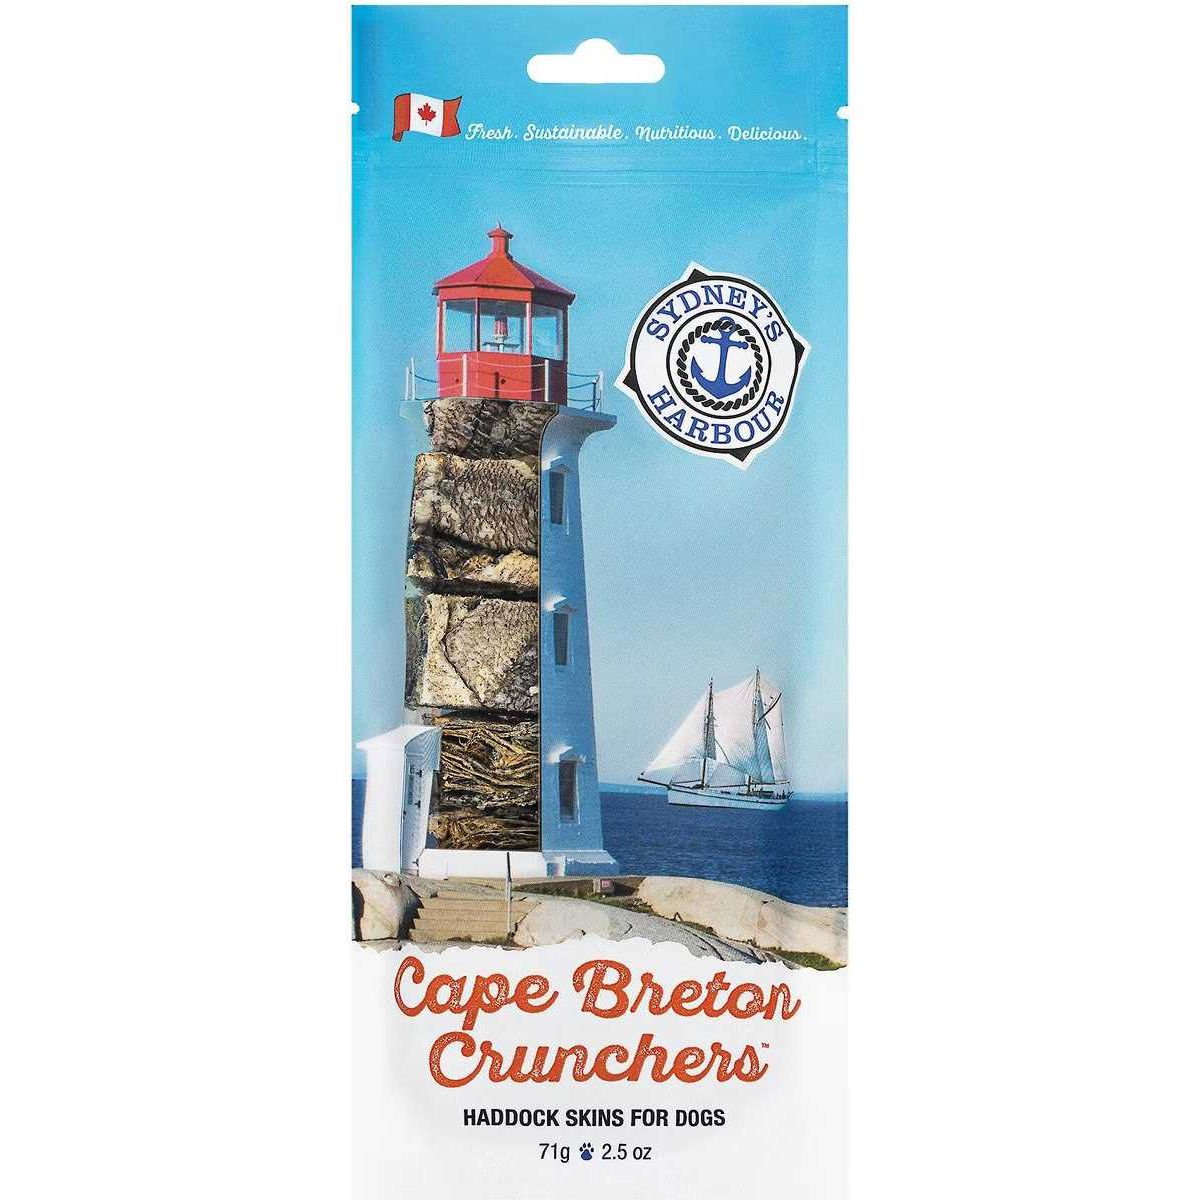 This & ThatCape Breton Crunchers Dehydrated Cat & Dog Treat 2.5oz This & That